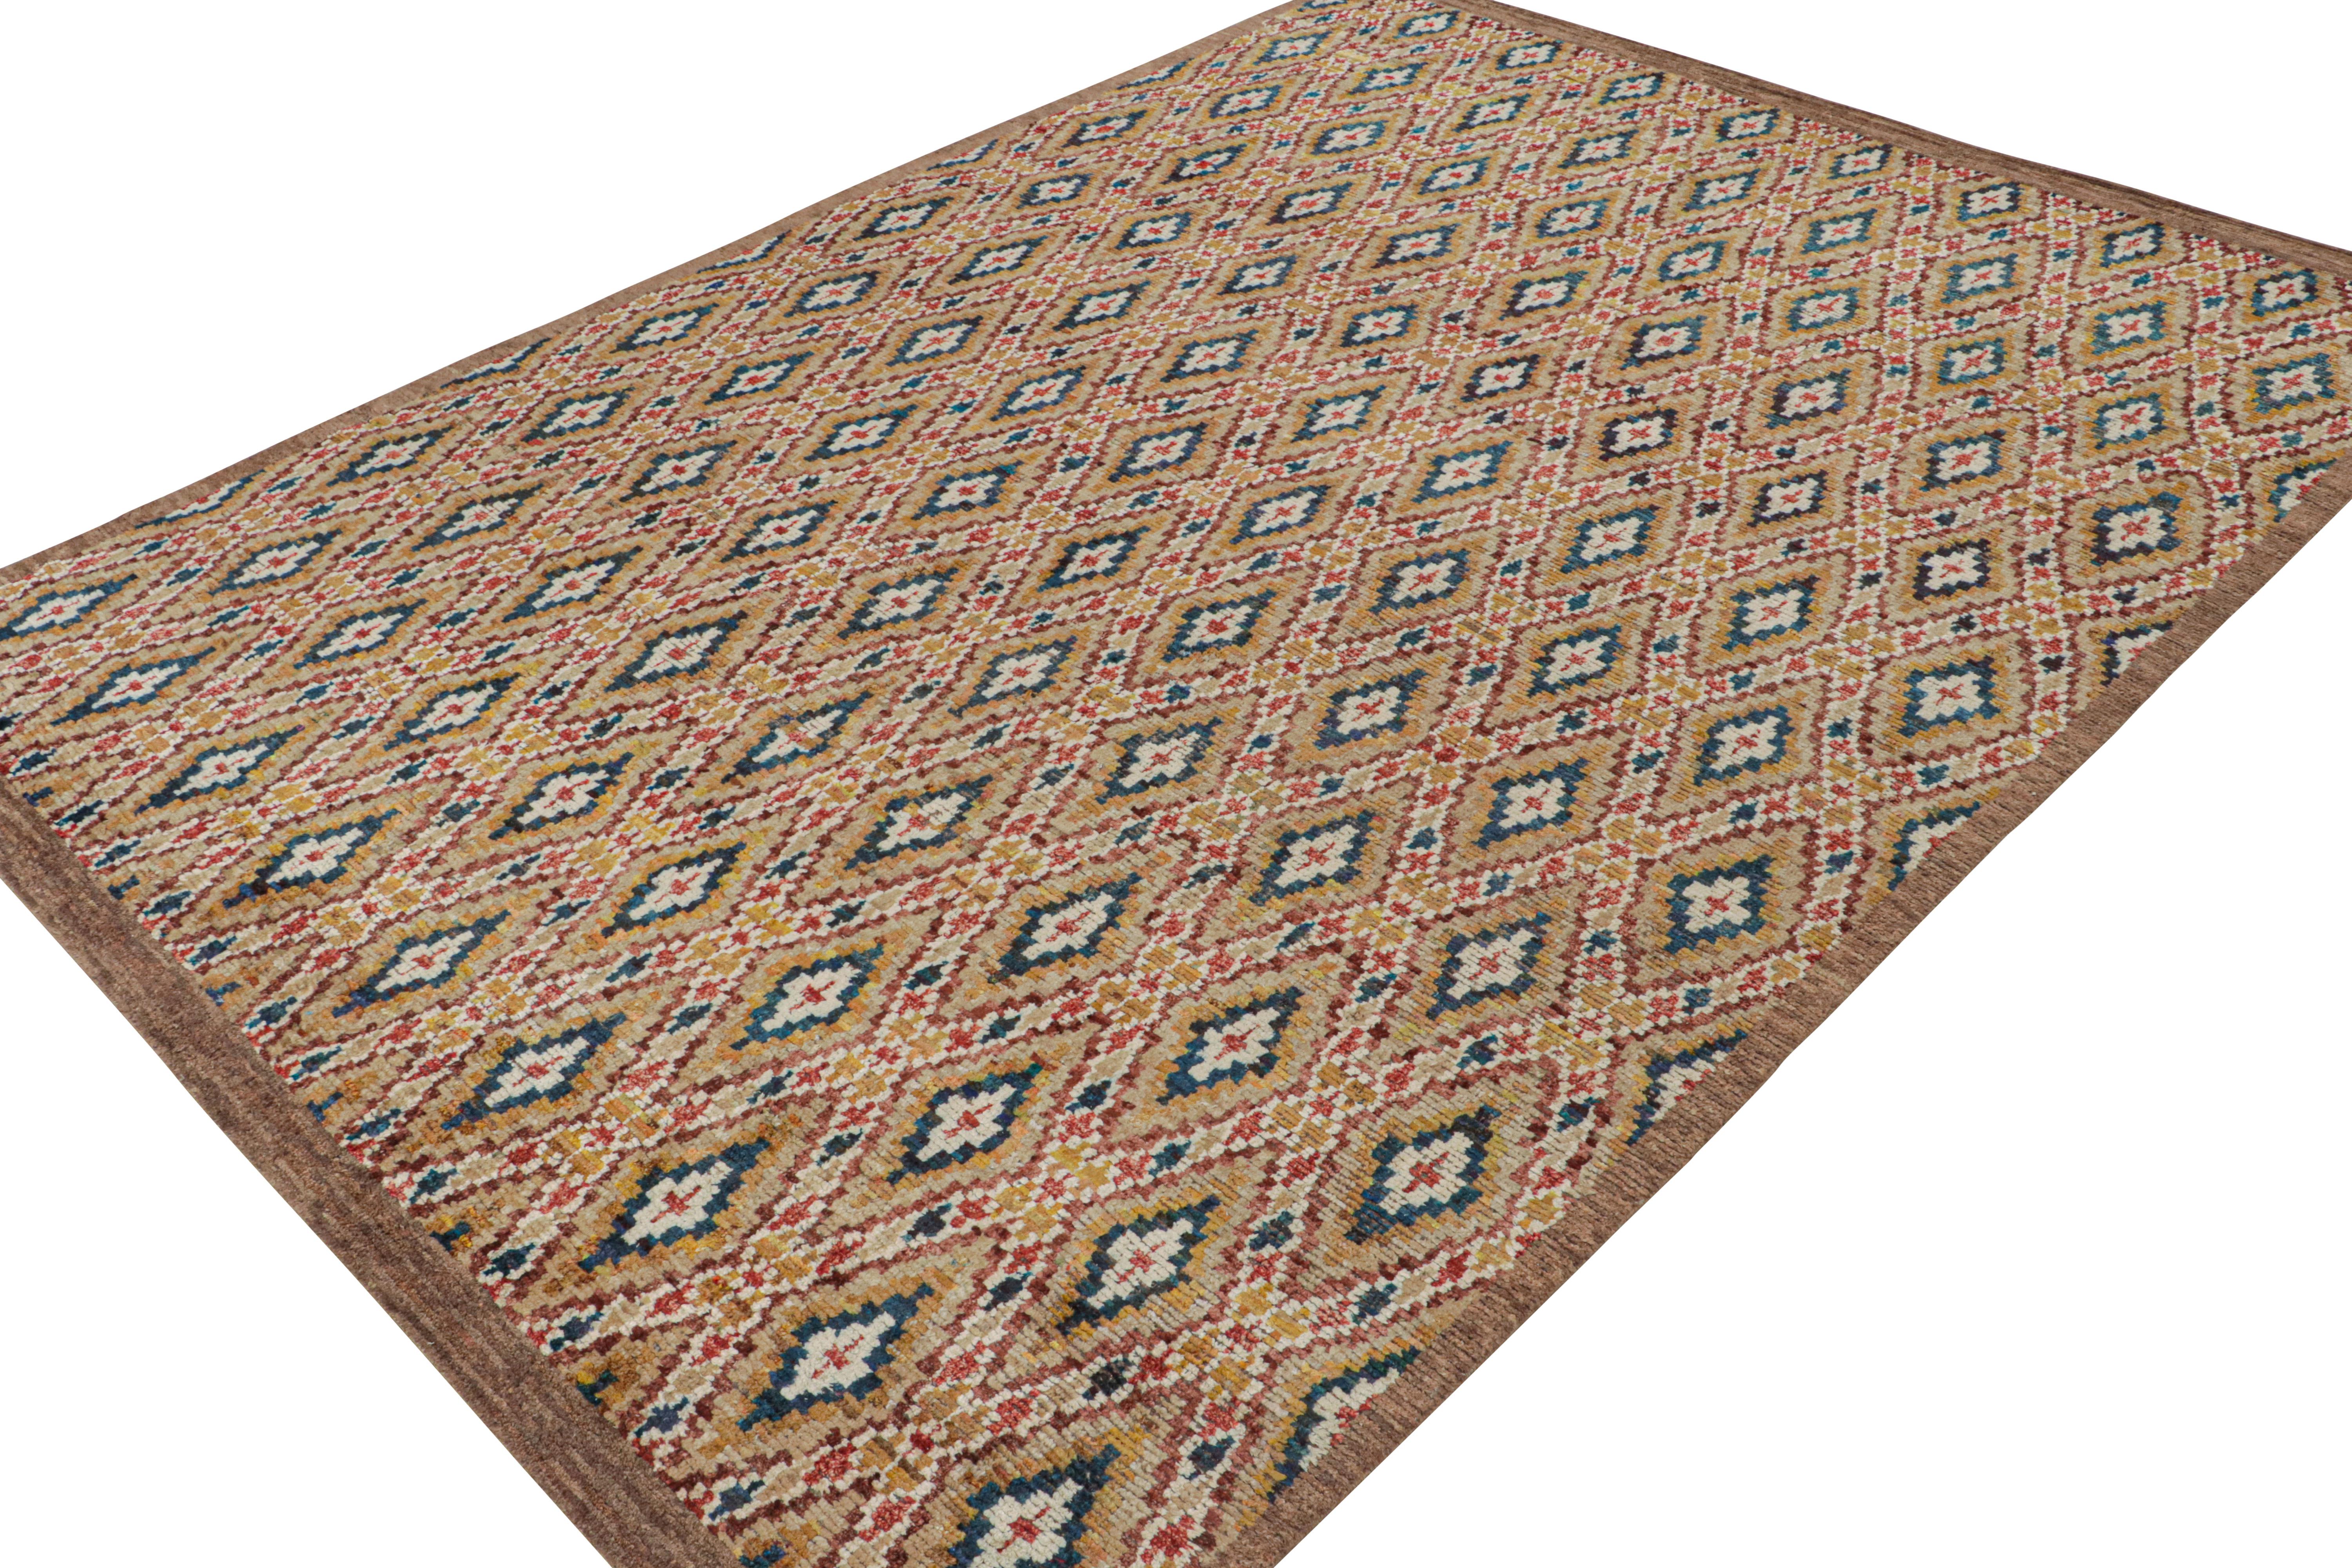 Tribal Rug & Kilim’s Moroccan Style Rug in Beige with Colorful Diamond Patterns For Sale